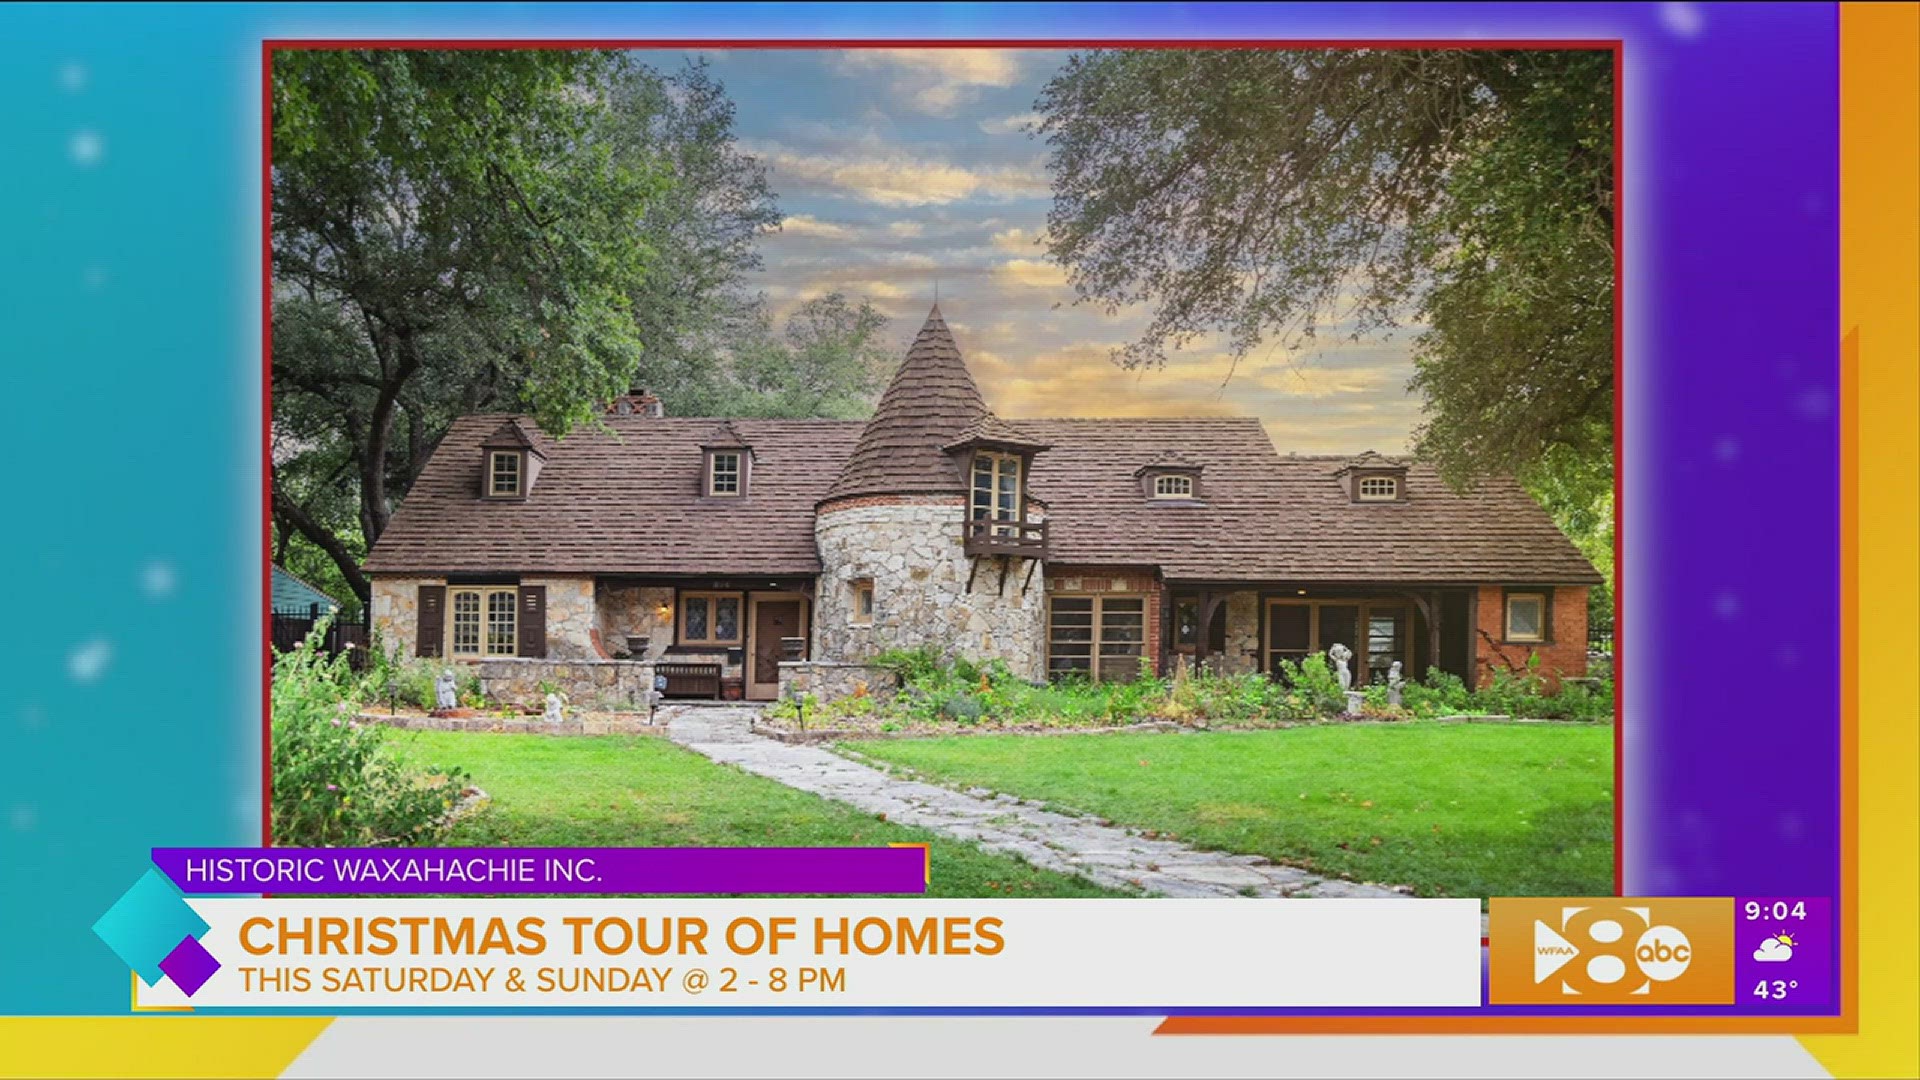 Historic Waxahachie Christmas Tour of Homes is back